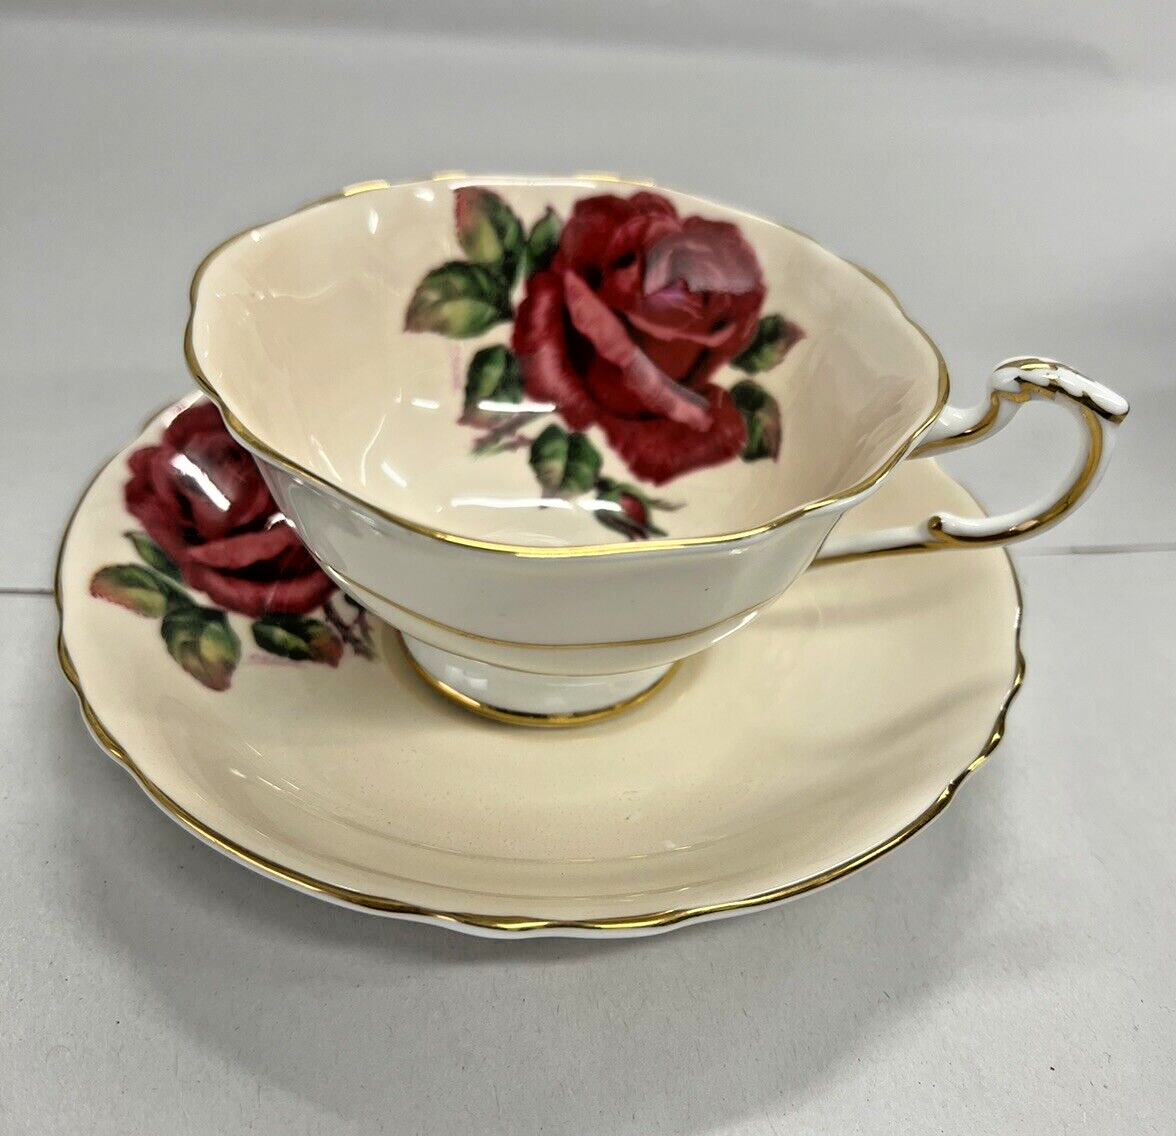 PARAGON England Teacup And Saucer LARGEST RED CABBAGE ROSE signed R JOHNSON